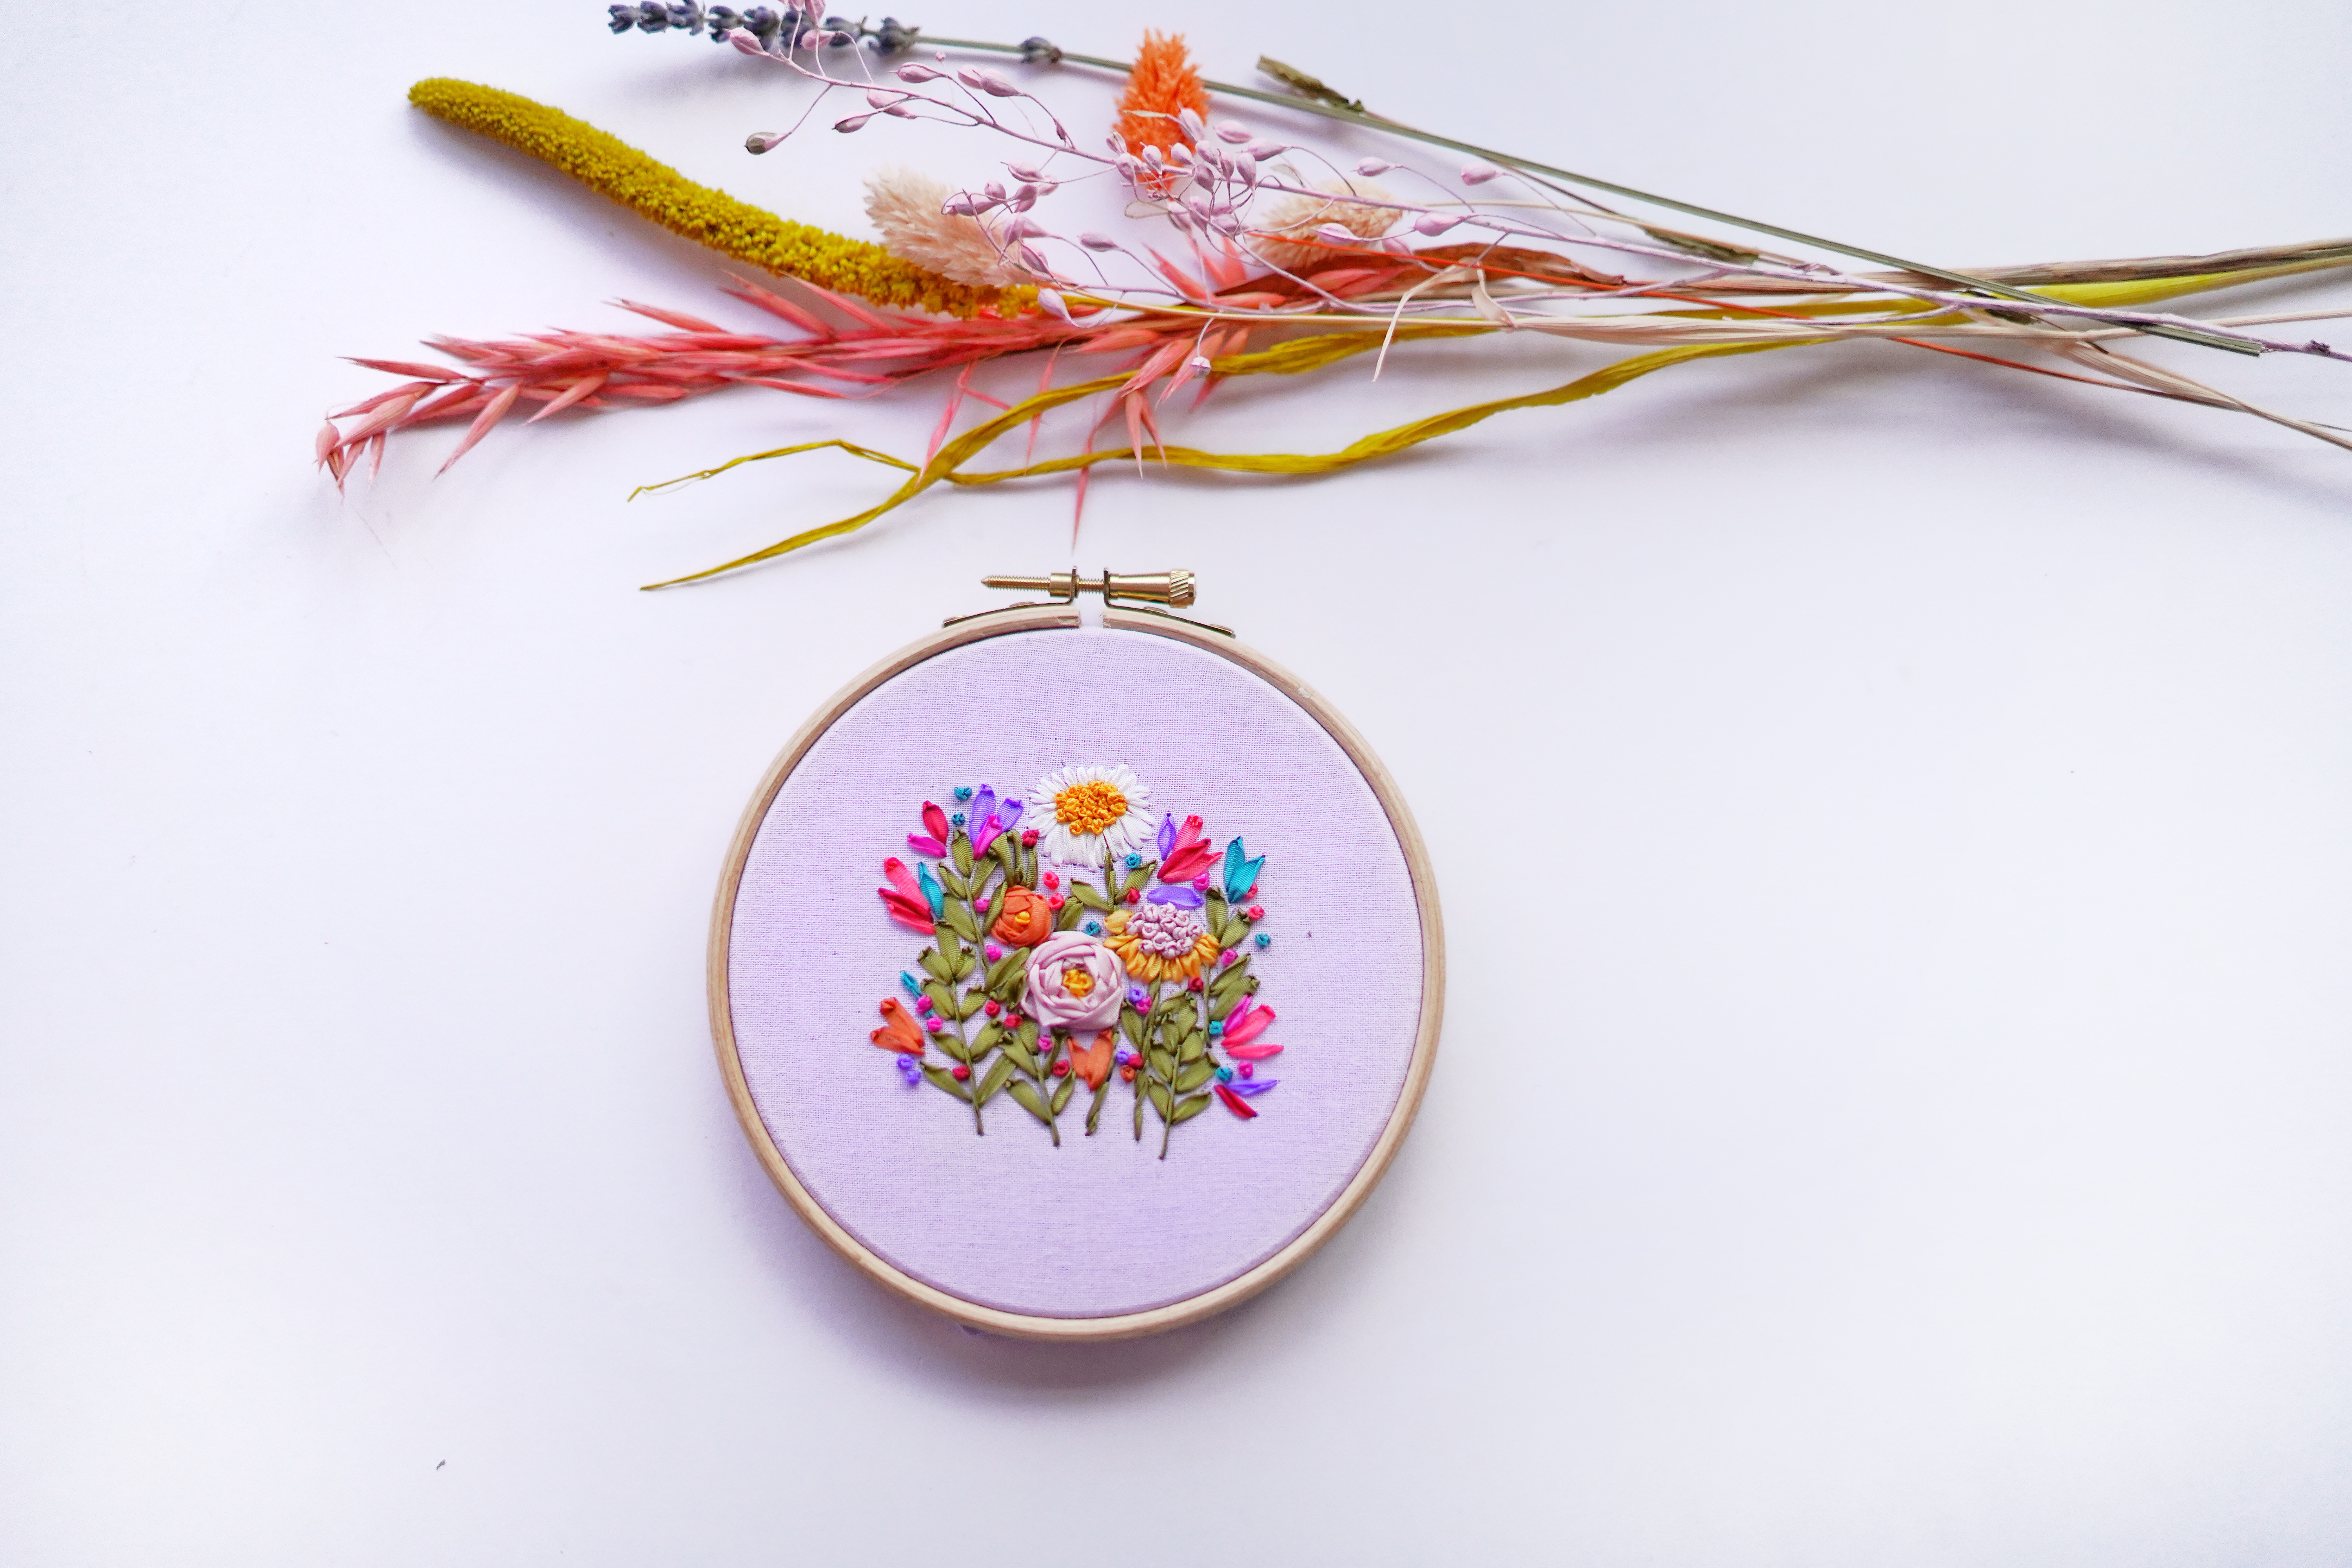 Flower Meadow, DIY Embroidery, Children's Embroidery Kit, Learn to  Embroider Kit 